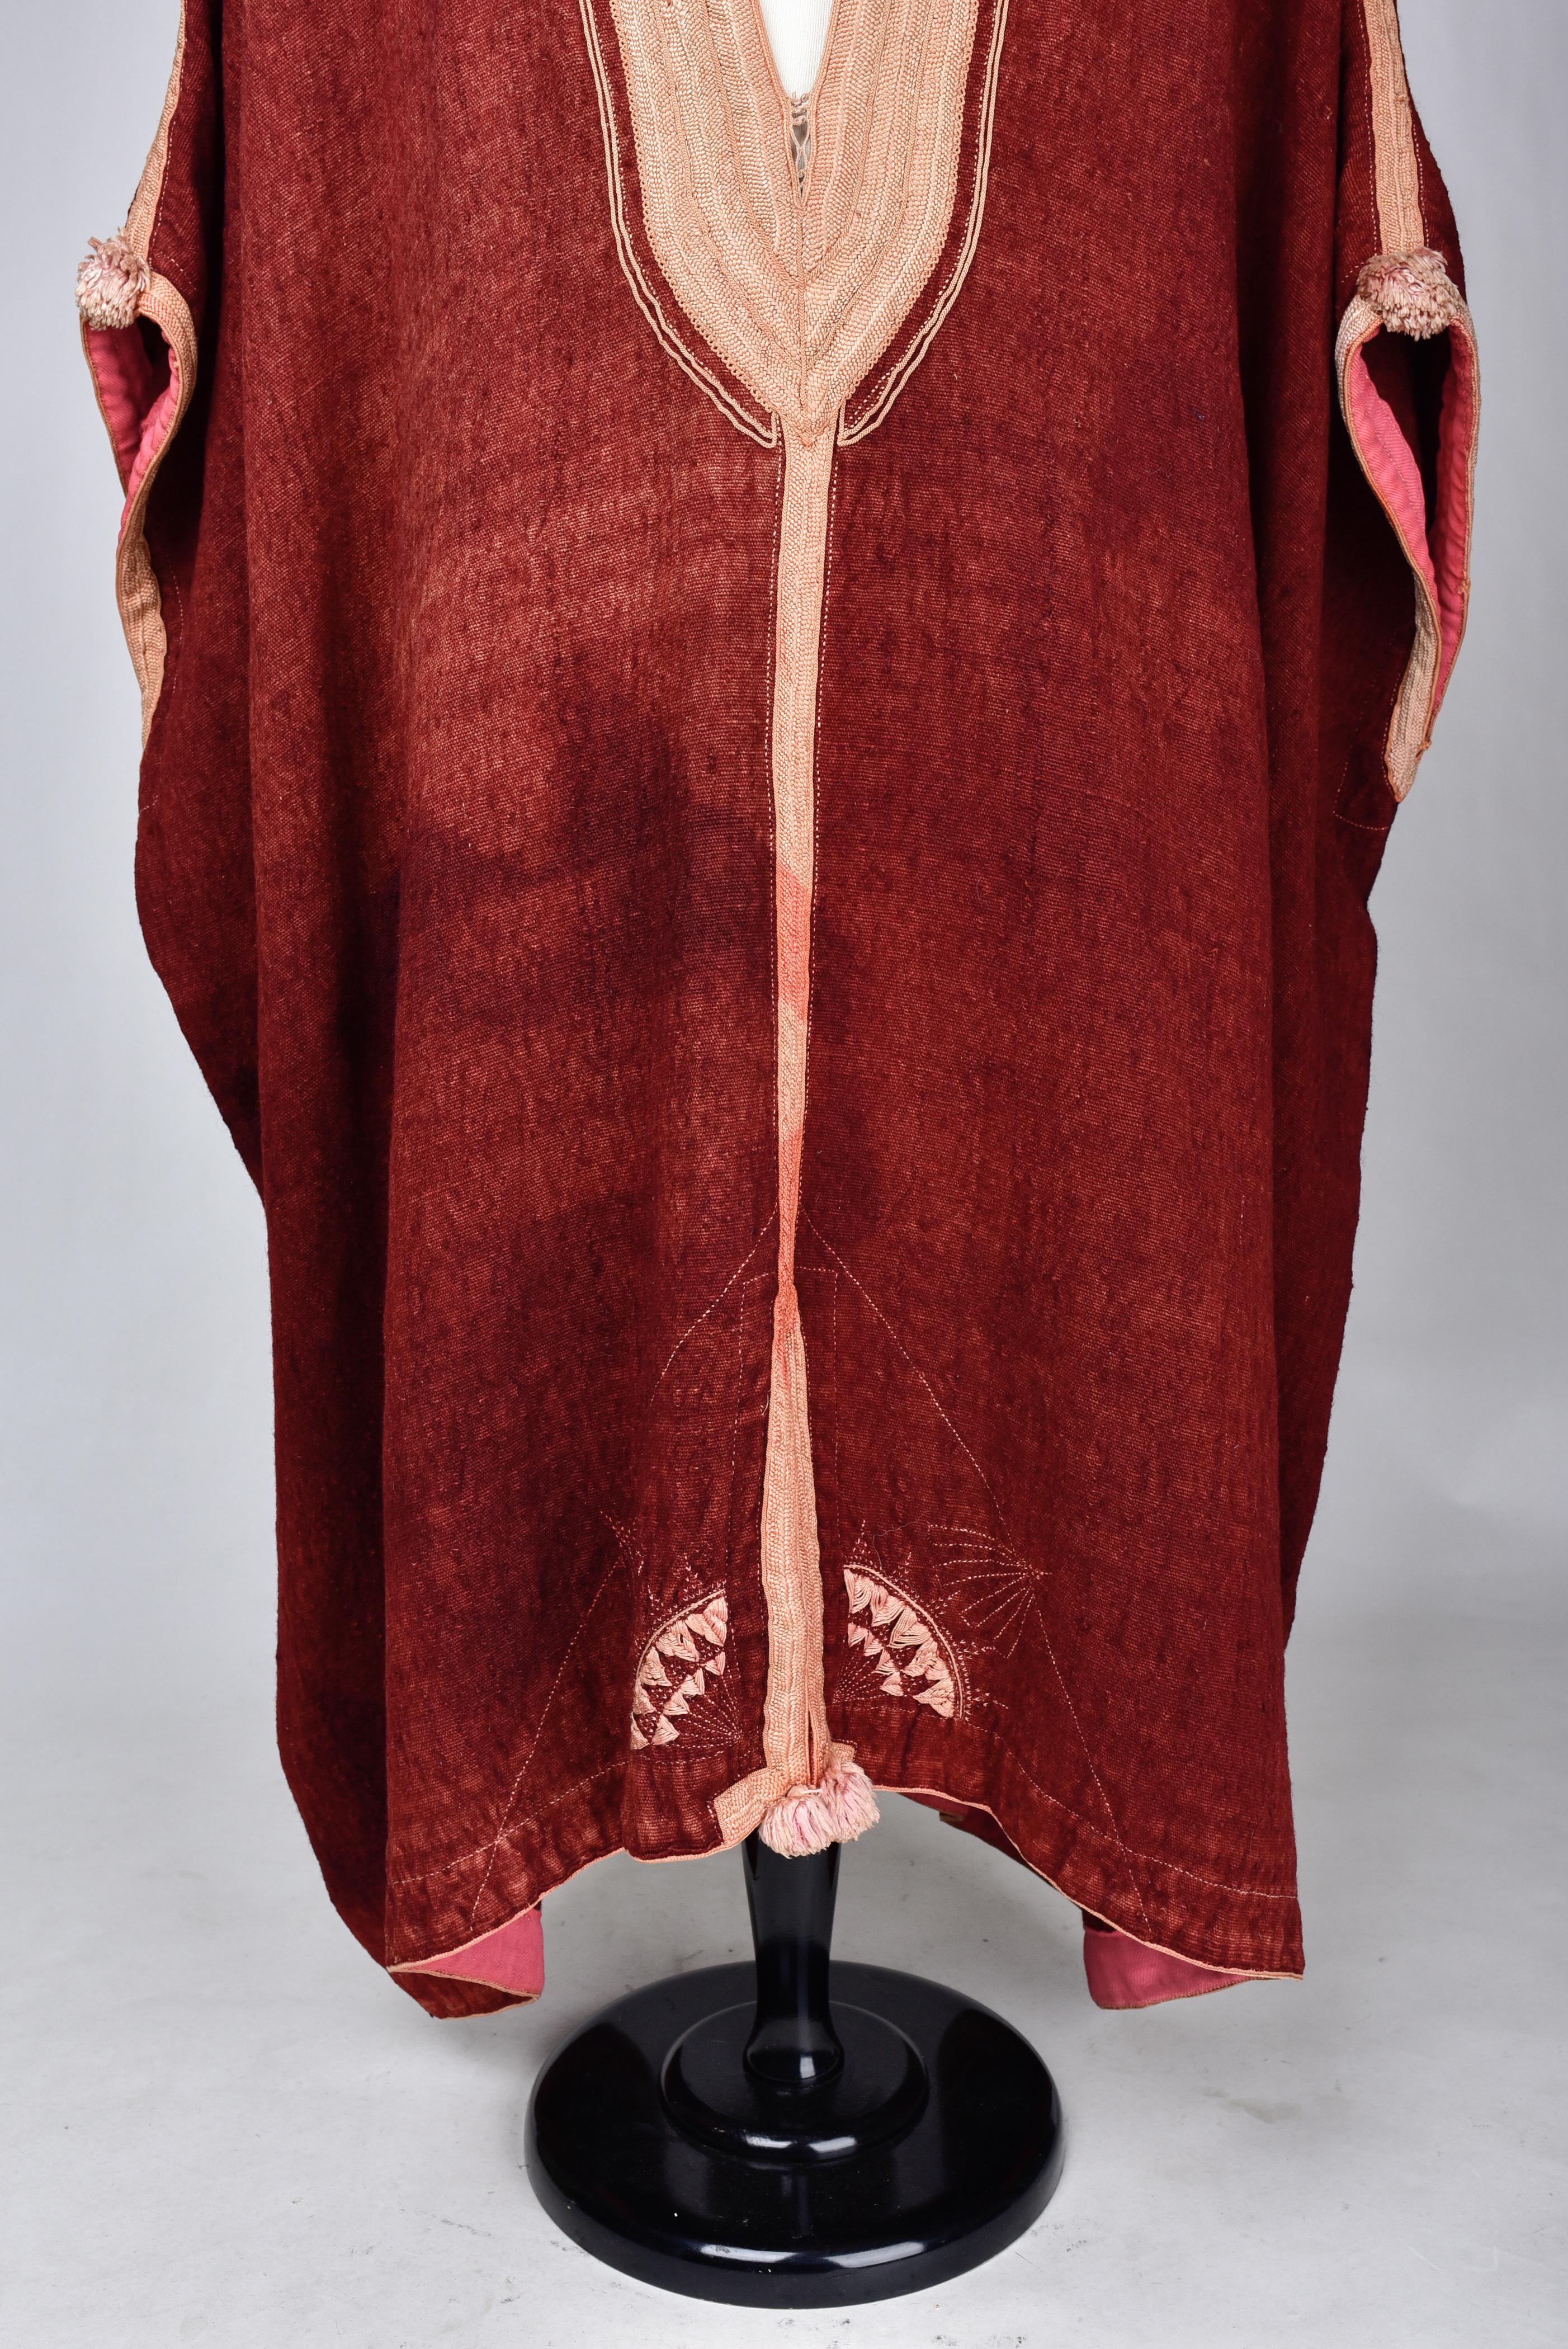 A Berber Djellaba in Dyed Cochineal Embroidered Wool - North Africa Circa 1900 For Sale 2